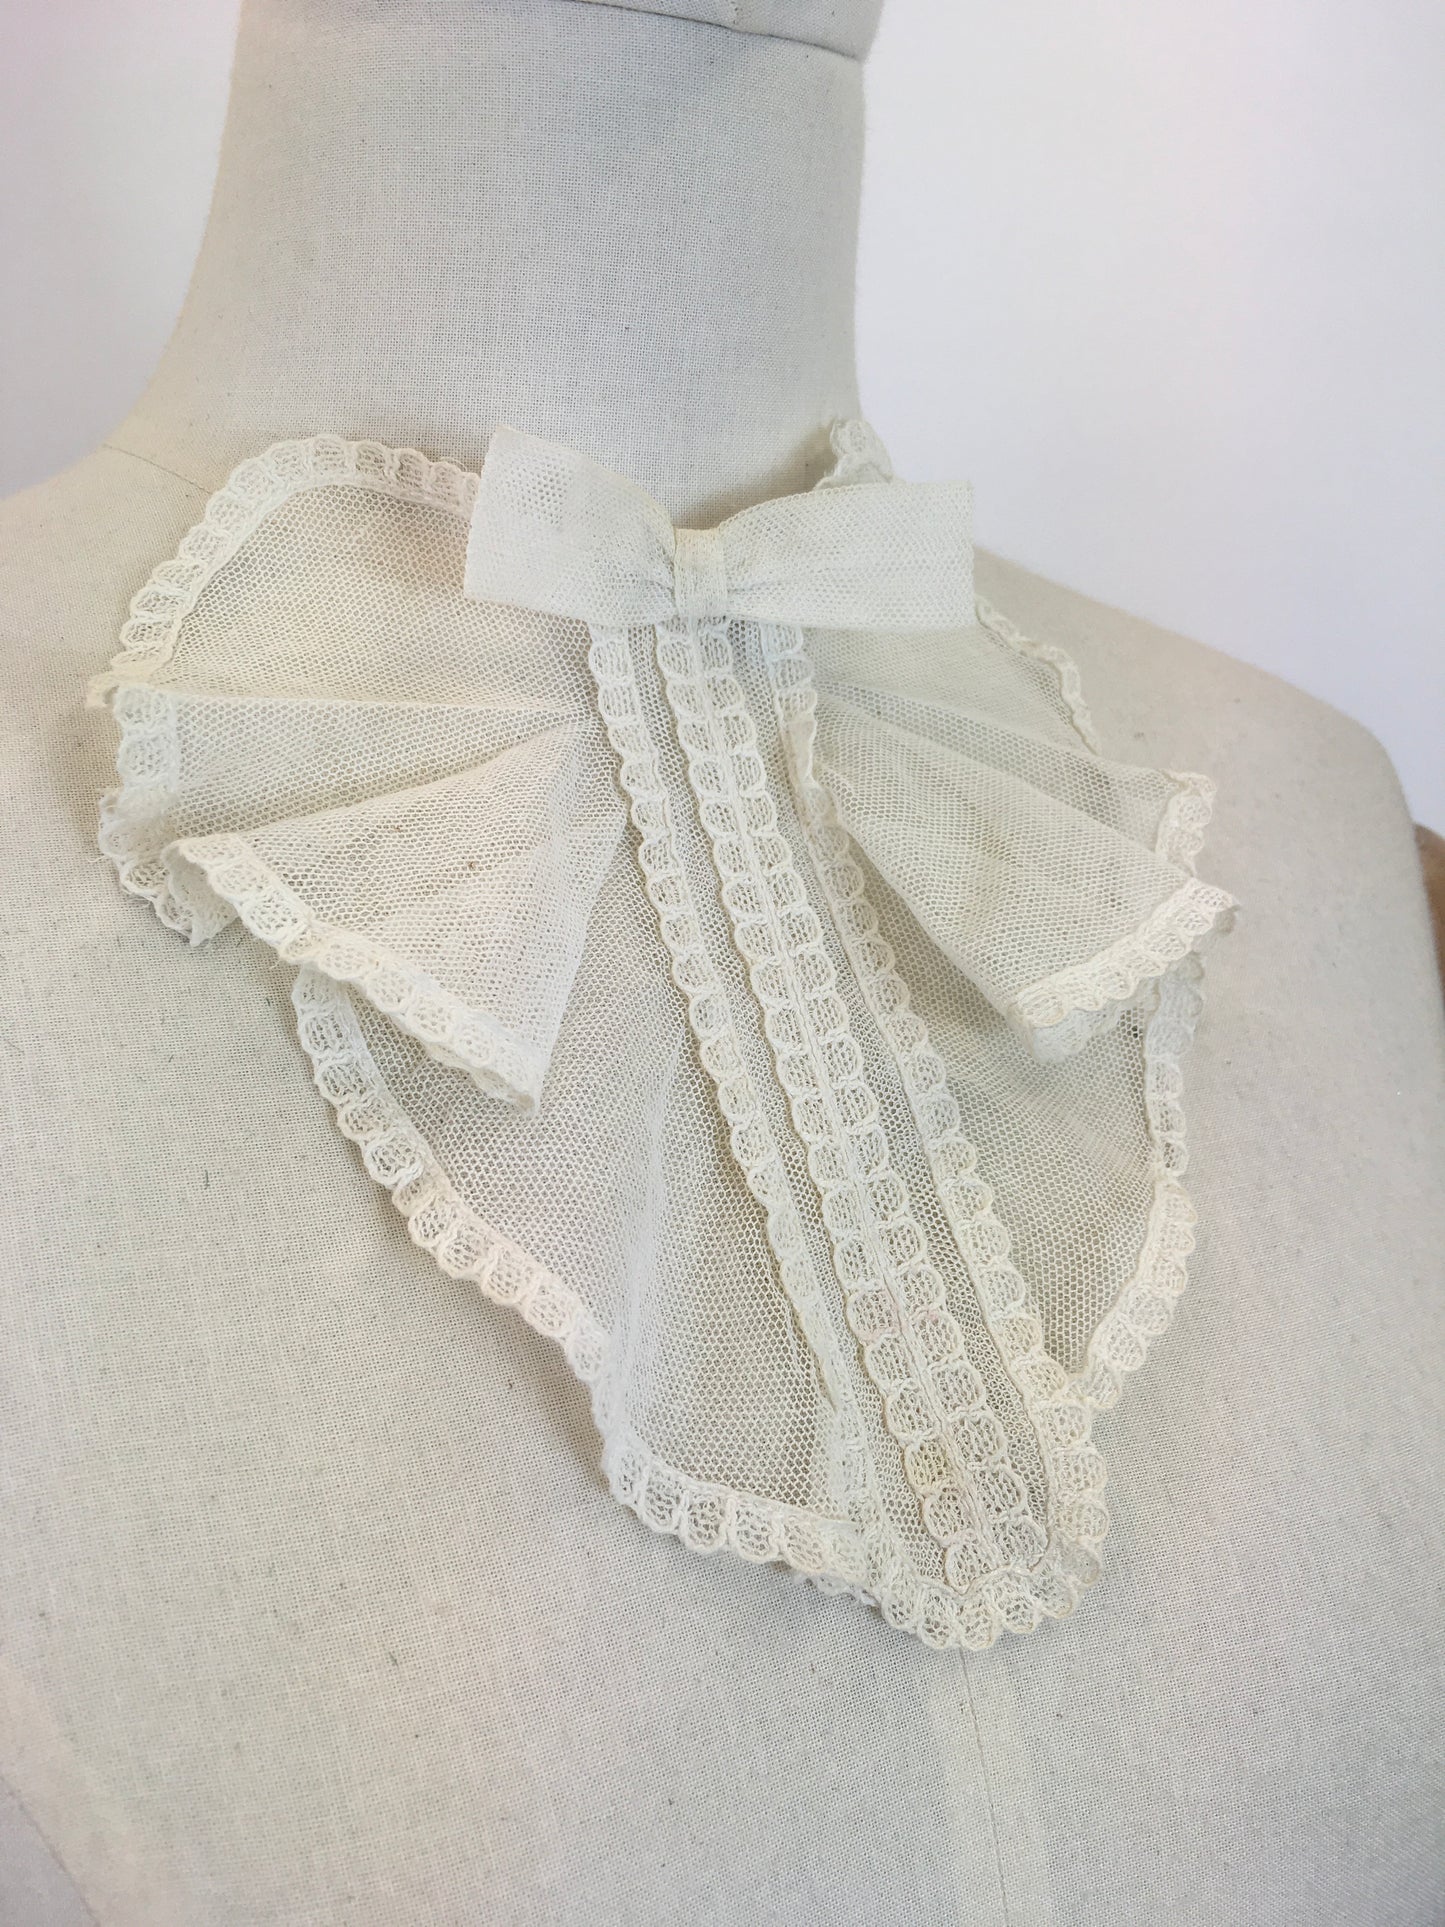 Original 1920's Fabulous Dickie - Made From A Fine Net with Lace And Bow Adornment